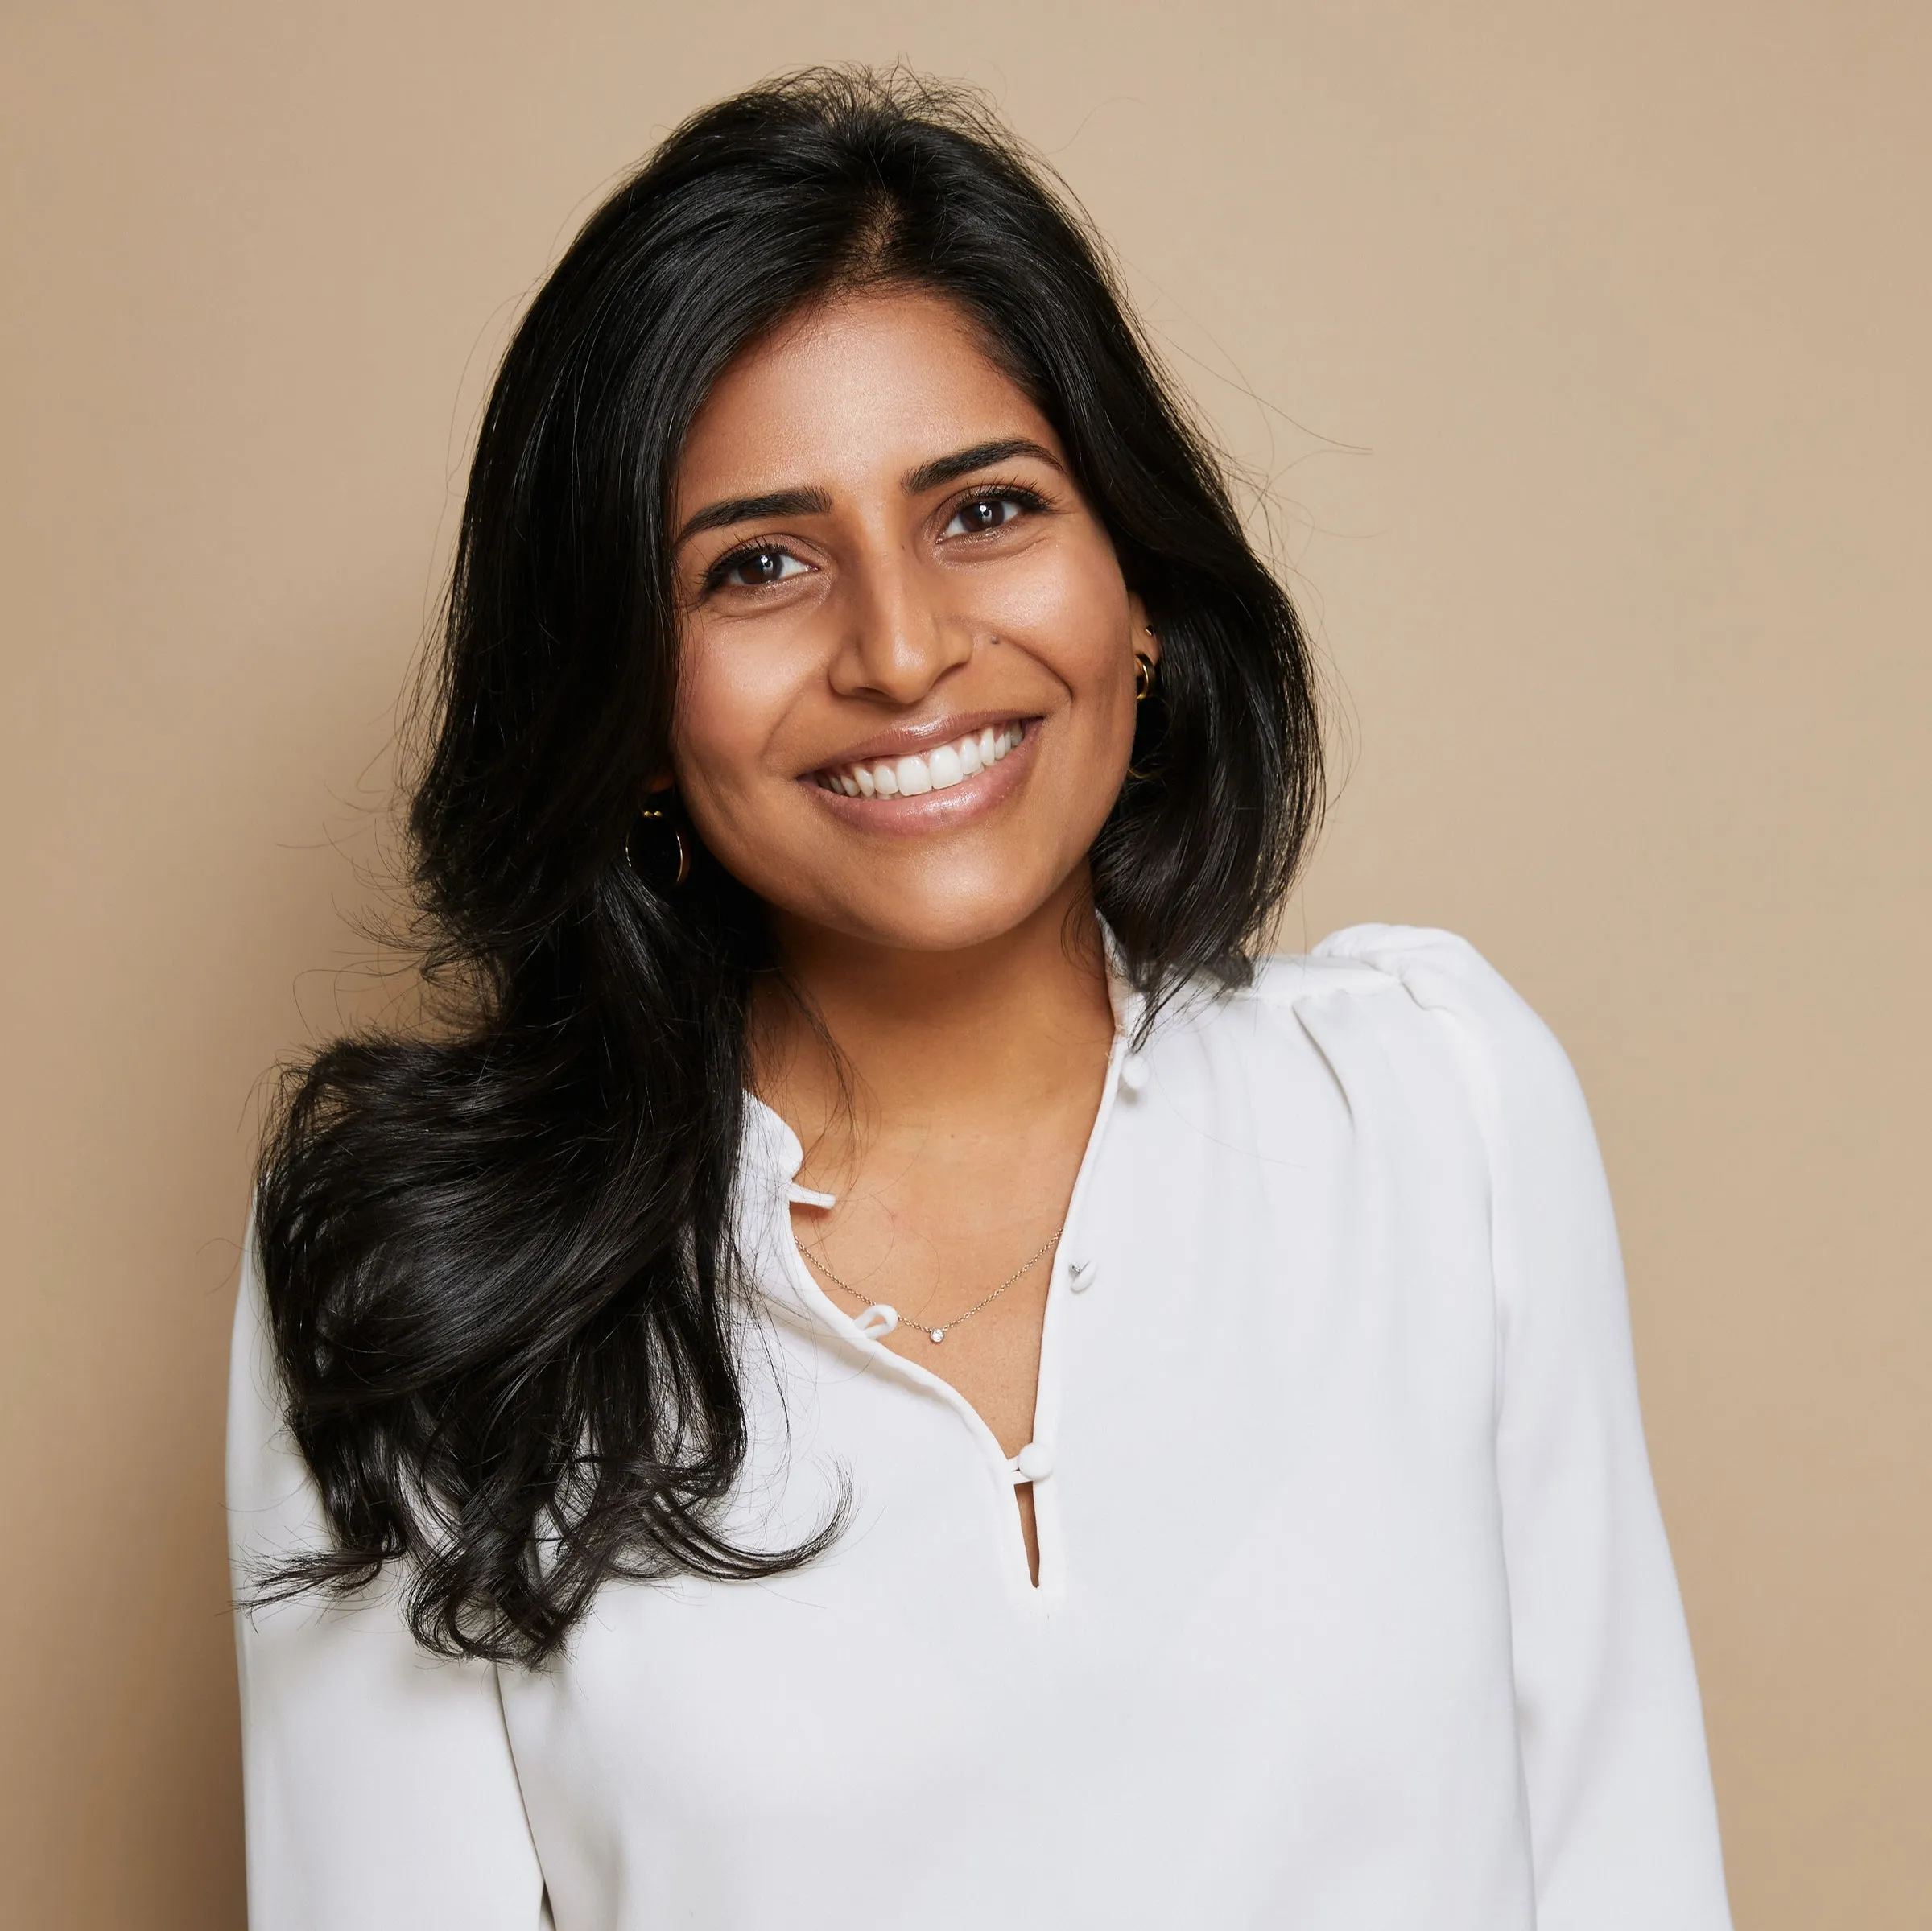 Pranitha Patil, Co-founder and COO